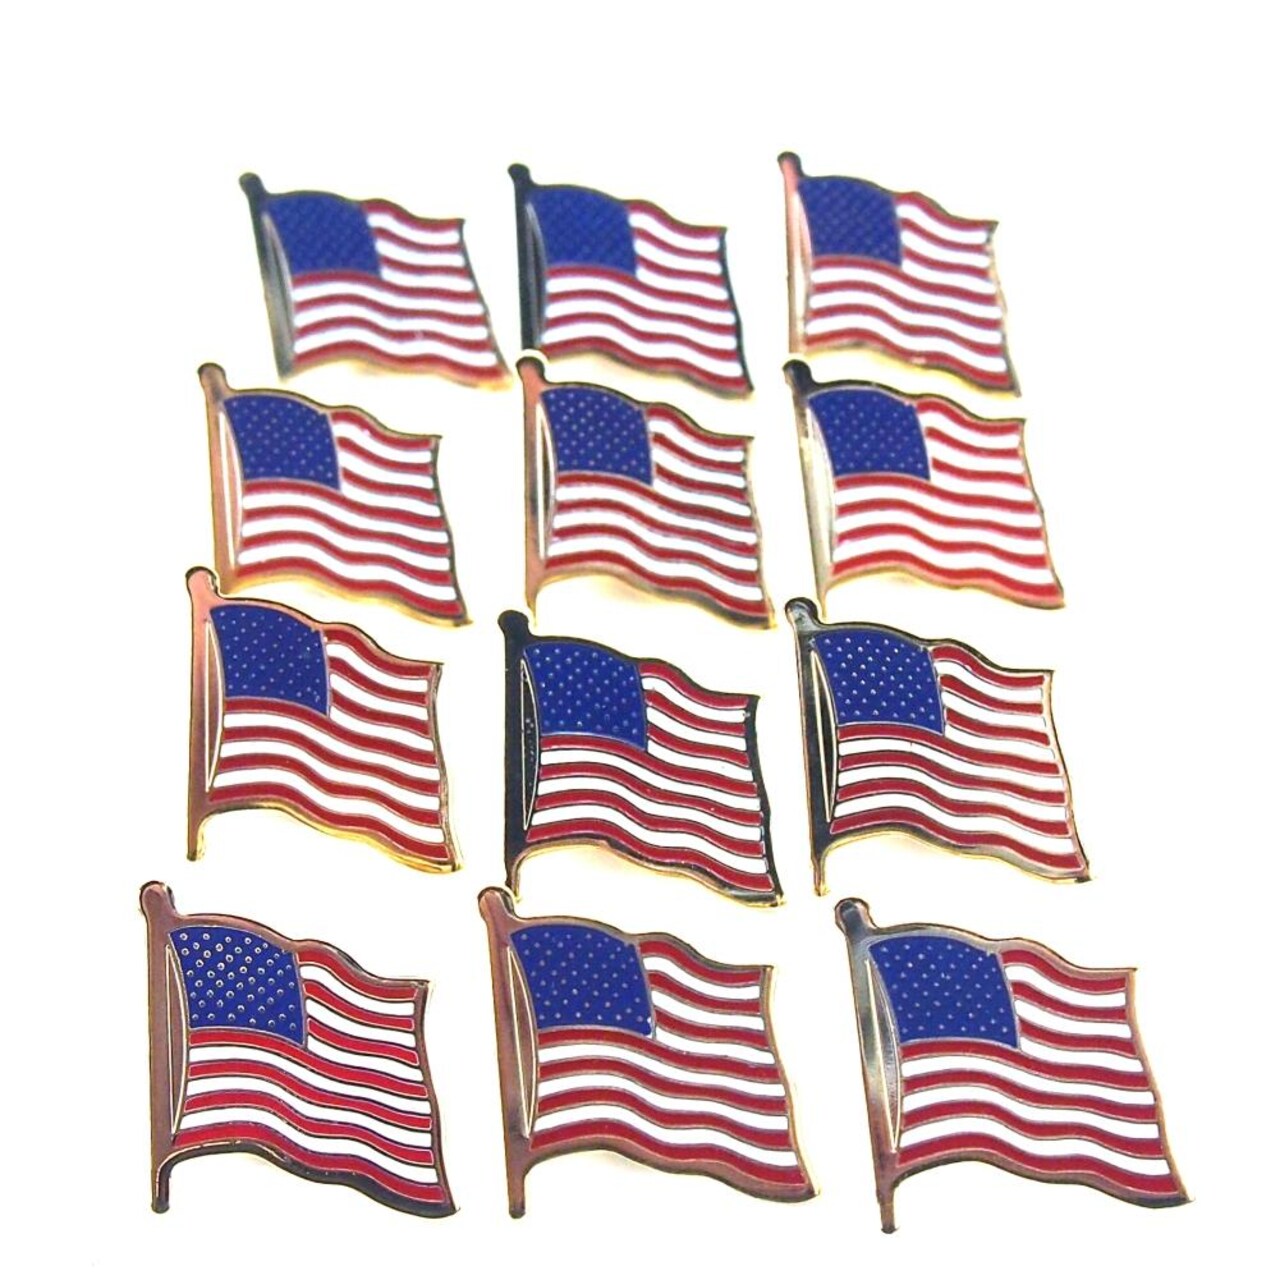 12 Gold Plated American Flag Pins United States USA Hat Tie Lapel Tacks